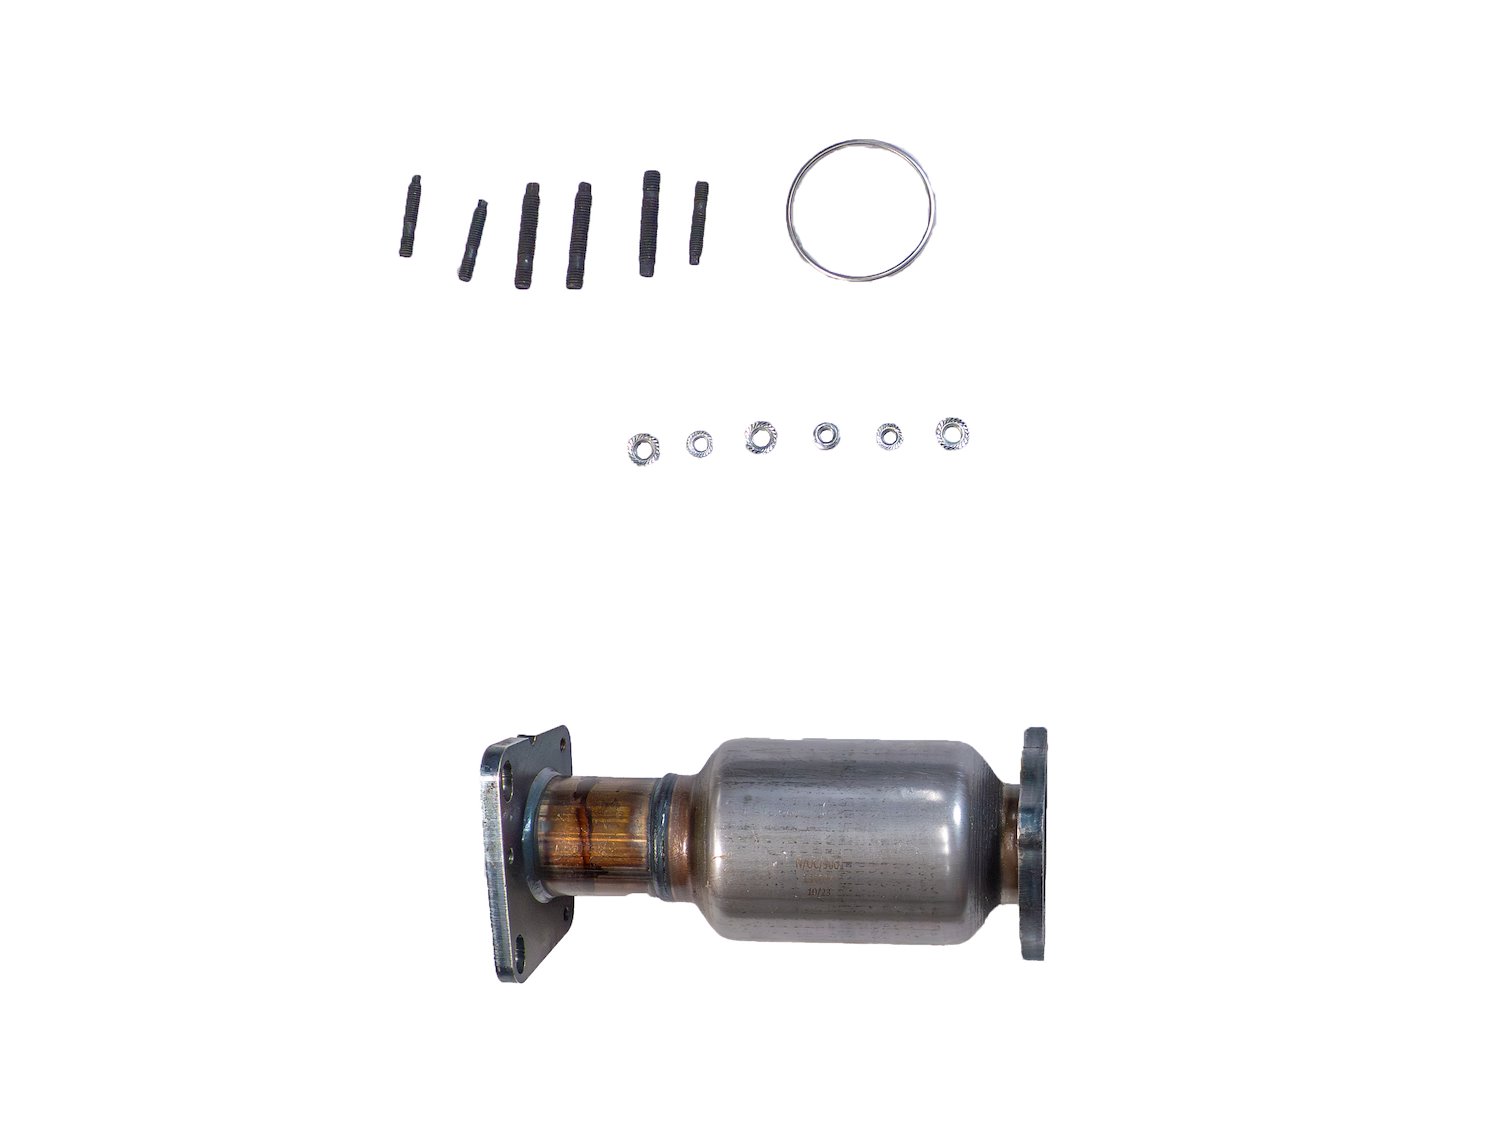 Catalytic Converter Fits Select 2010-2017 Buick Models & Select 2012-2014 Chevrolet Models w/2.4L 4 cyl. Eng. [Front]